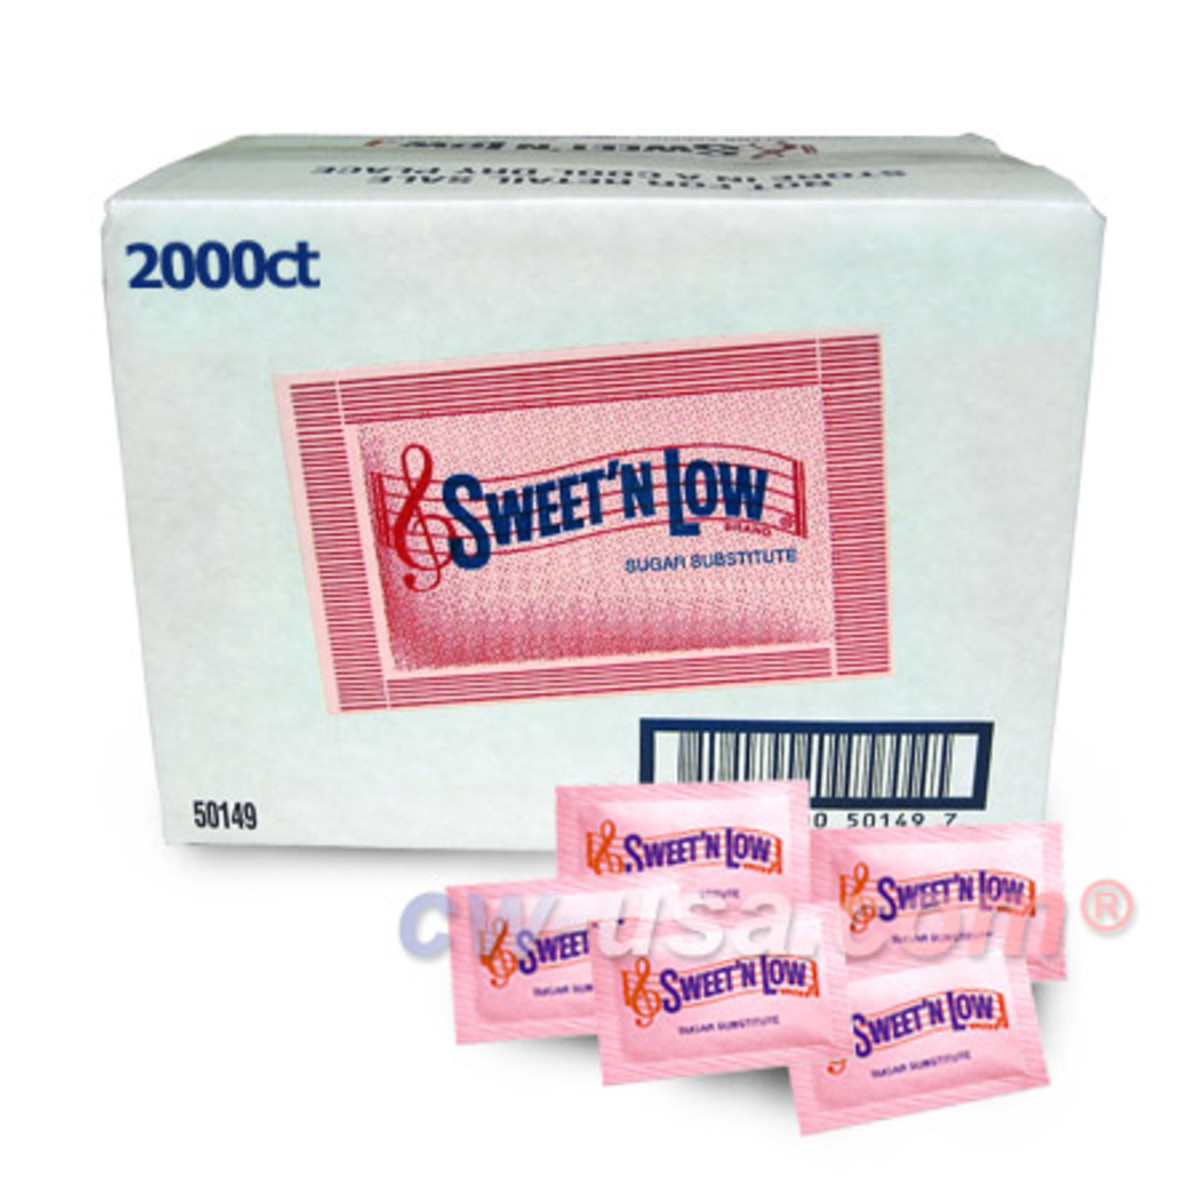 are-artificial-sweeteners-bad-for-you